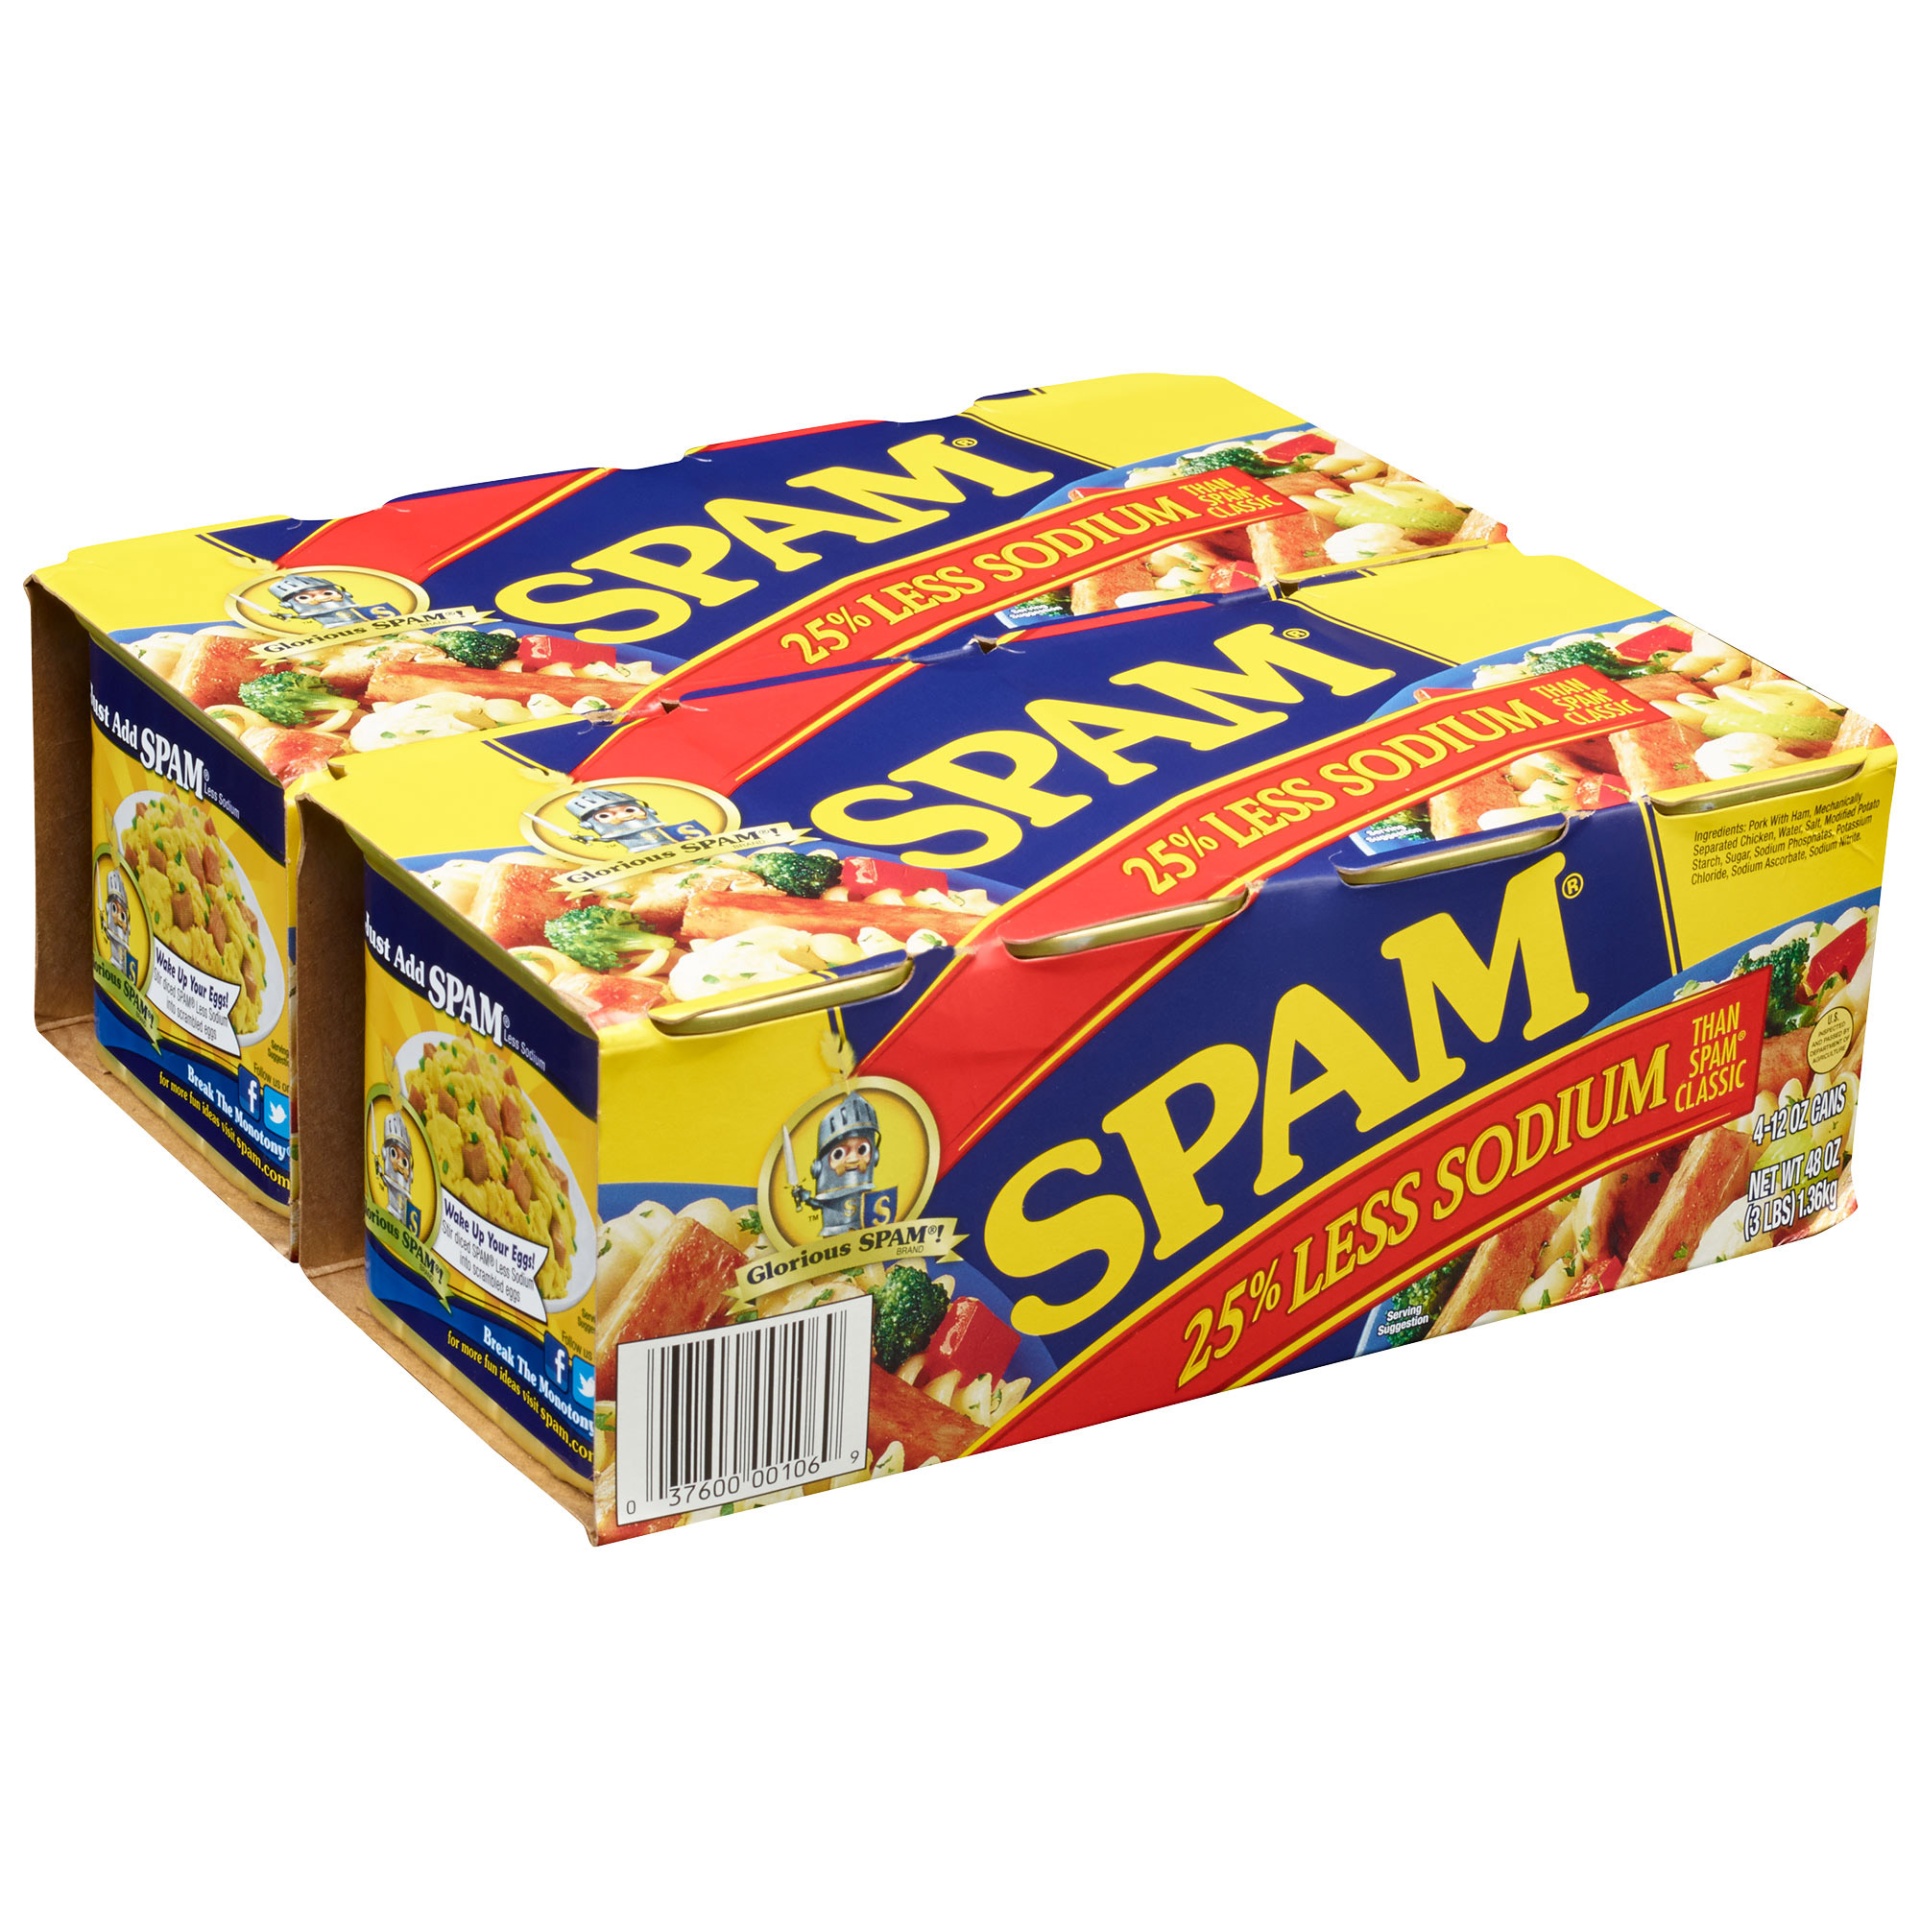 Spam Luncheon Meat Variety Pack ( Pack of 9 )